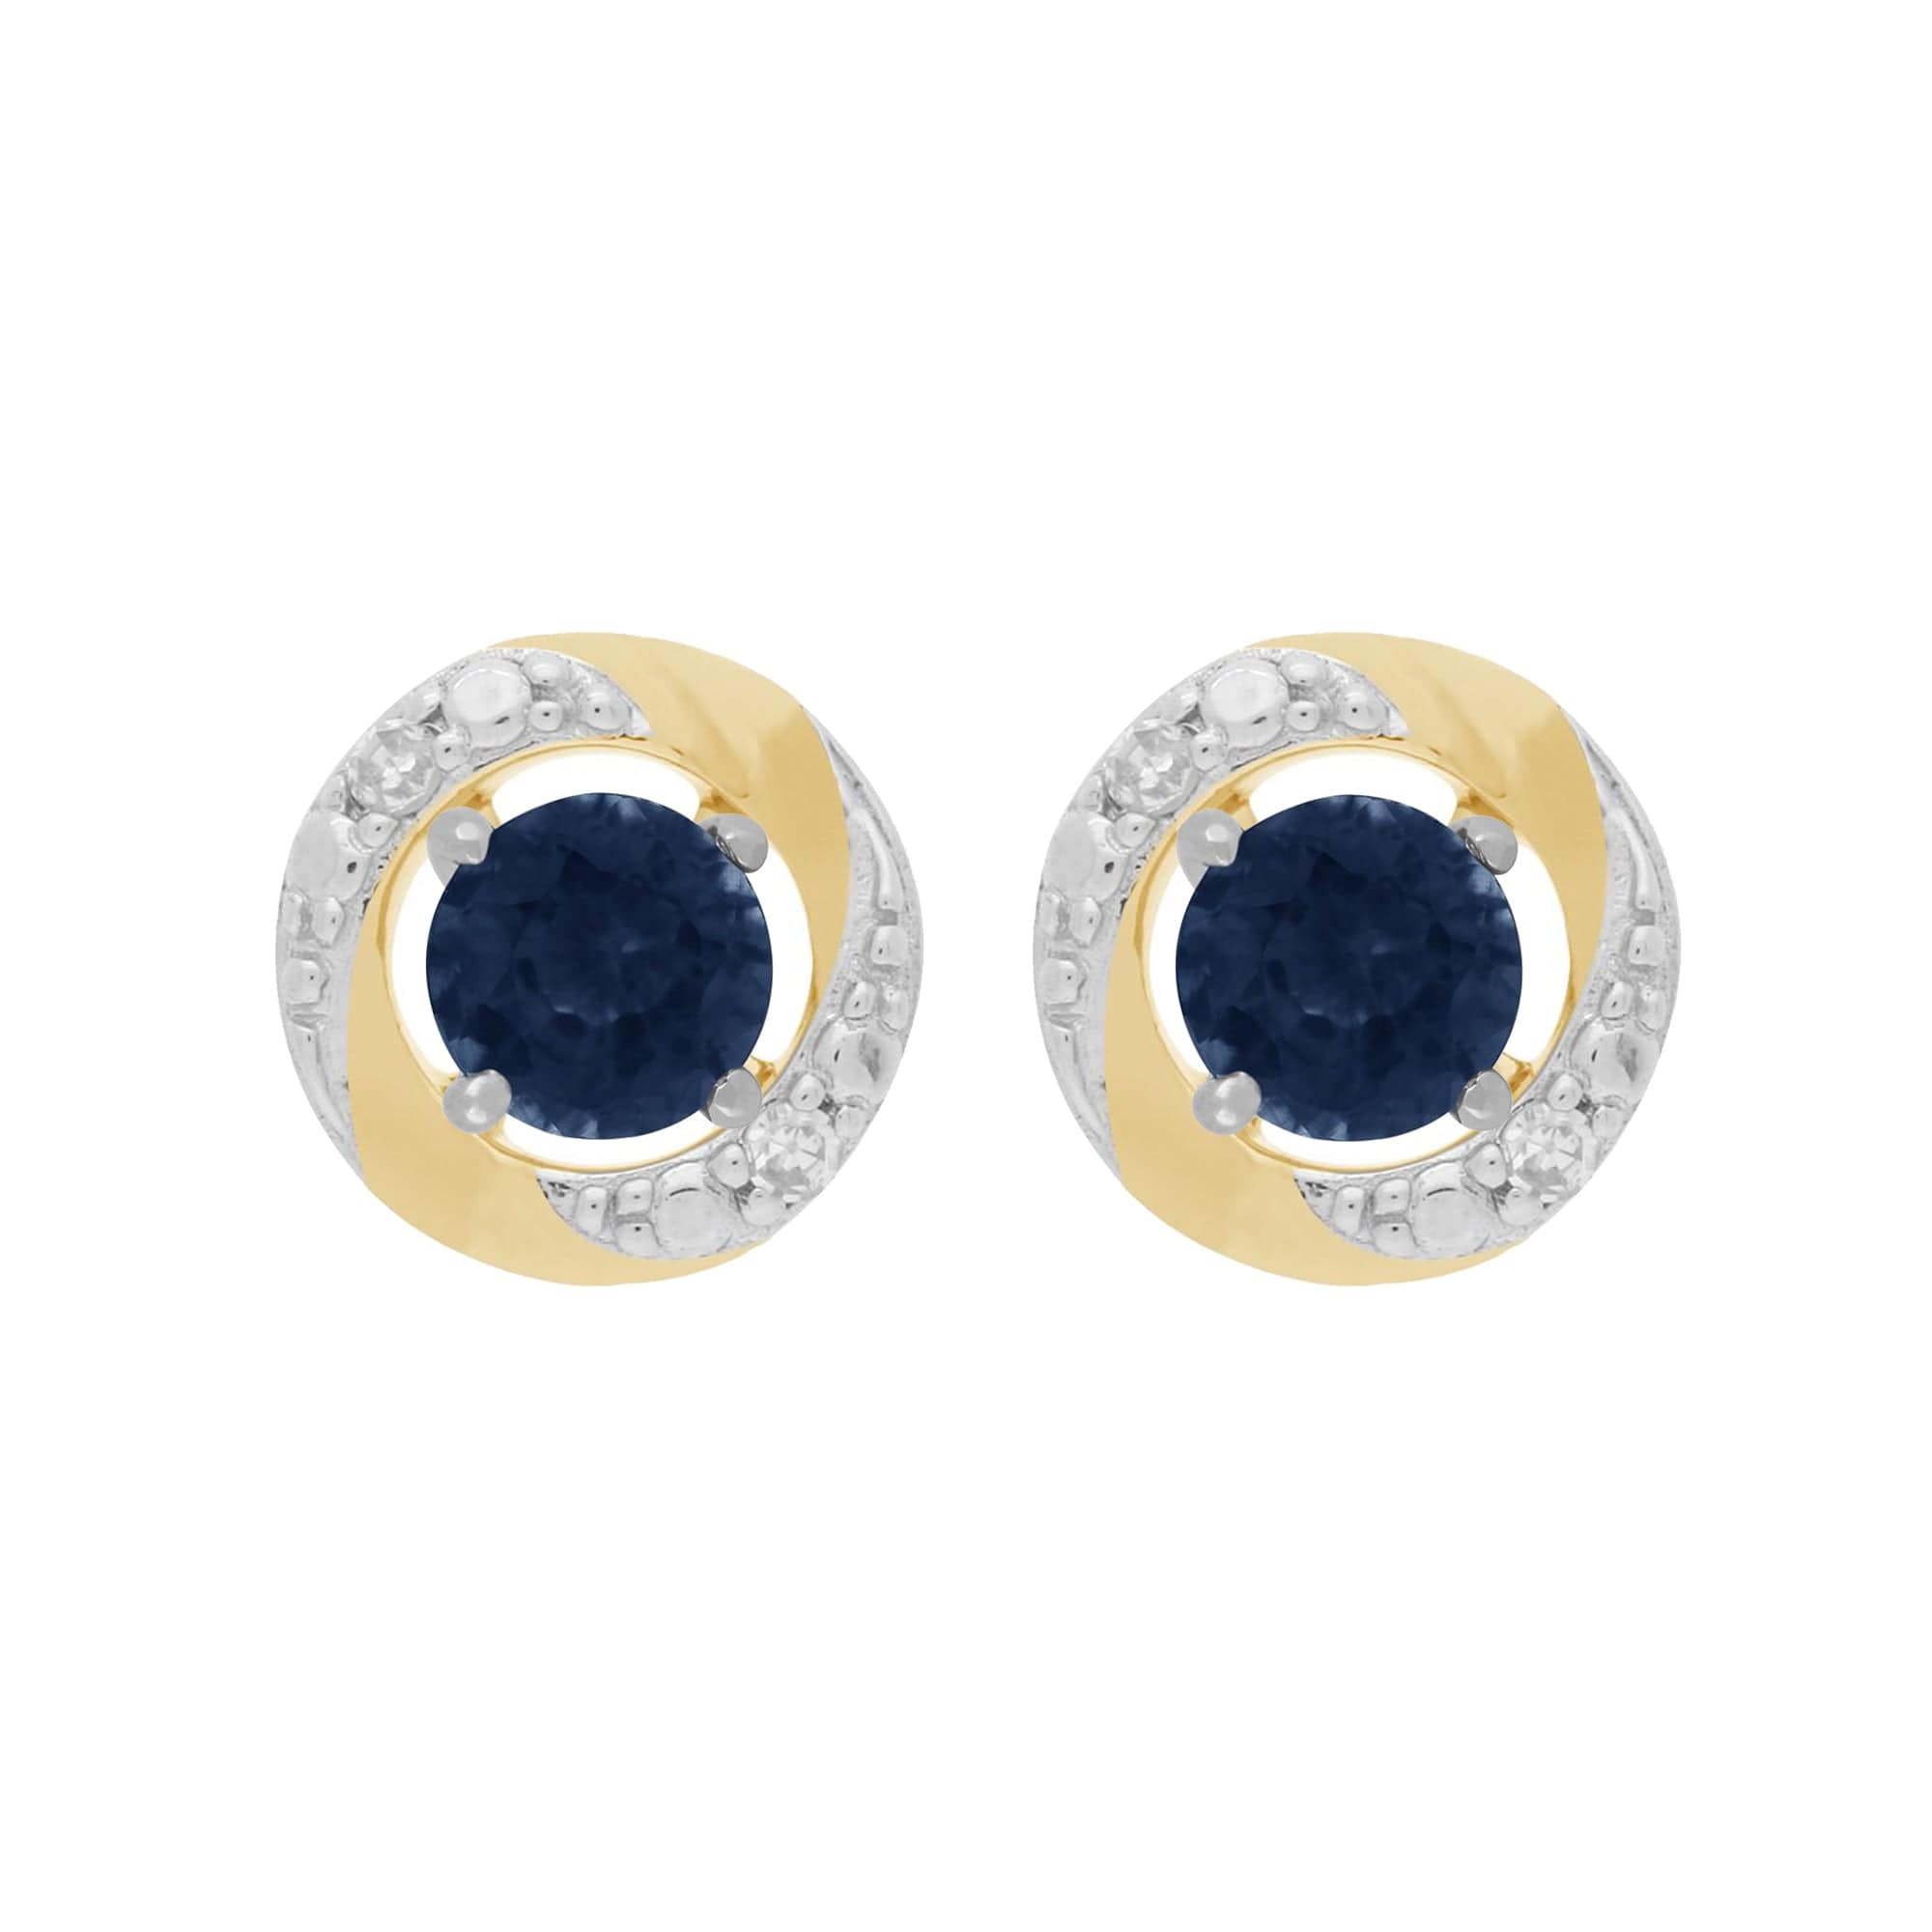 117E0031169-191E0374019 9ct White Gold Blue Sapphire Stud Earrings with Detachable Diamond Halo Ear Jacket in 9ct Yellow Gold 1